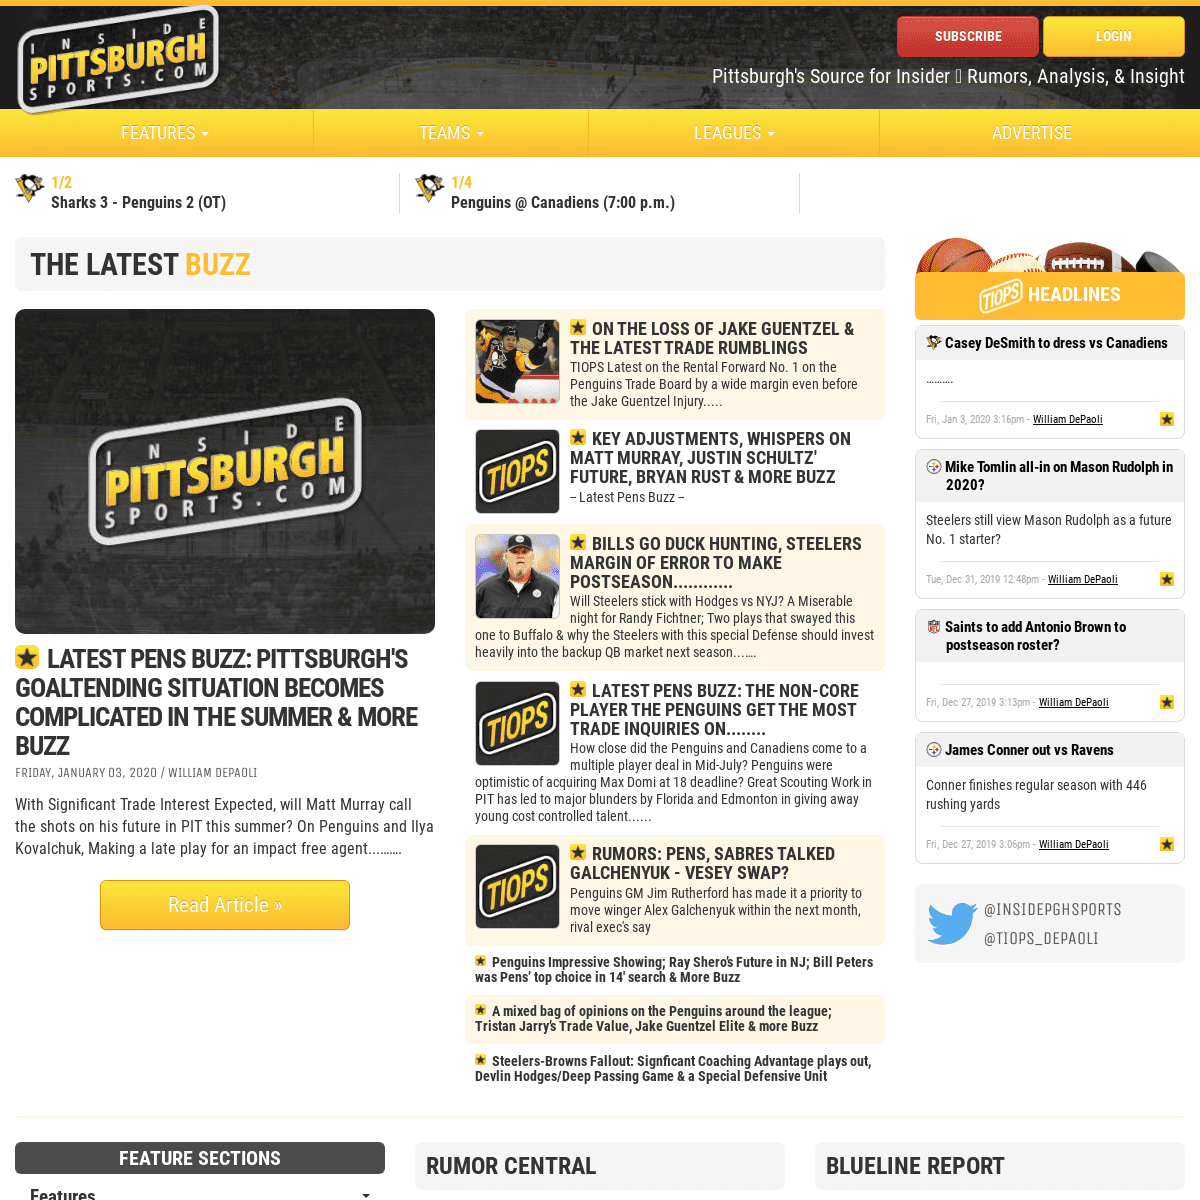 A complete backup of insidepittsburghsports.com